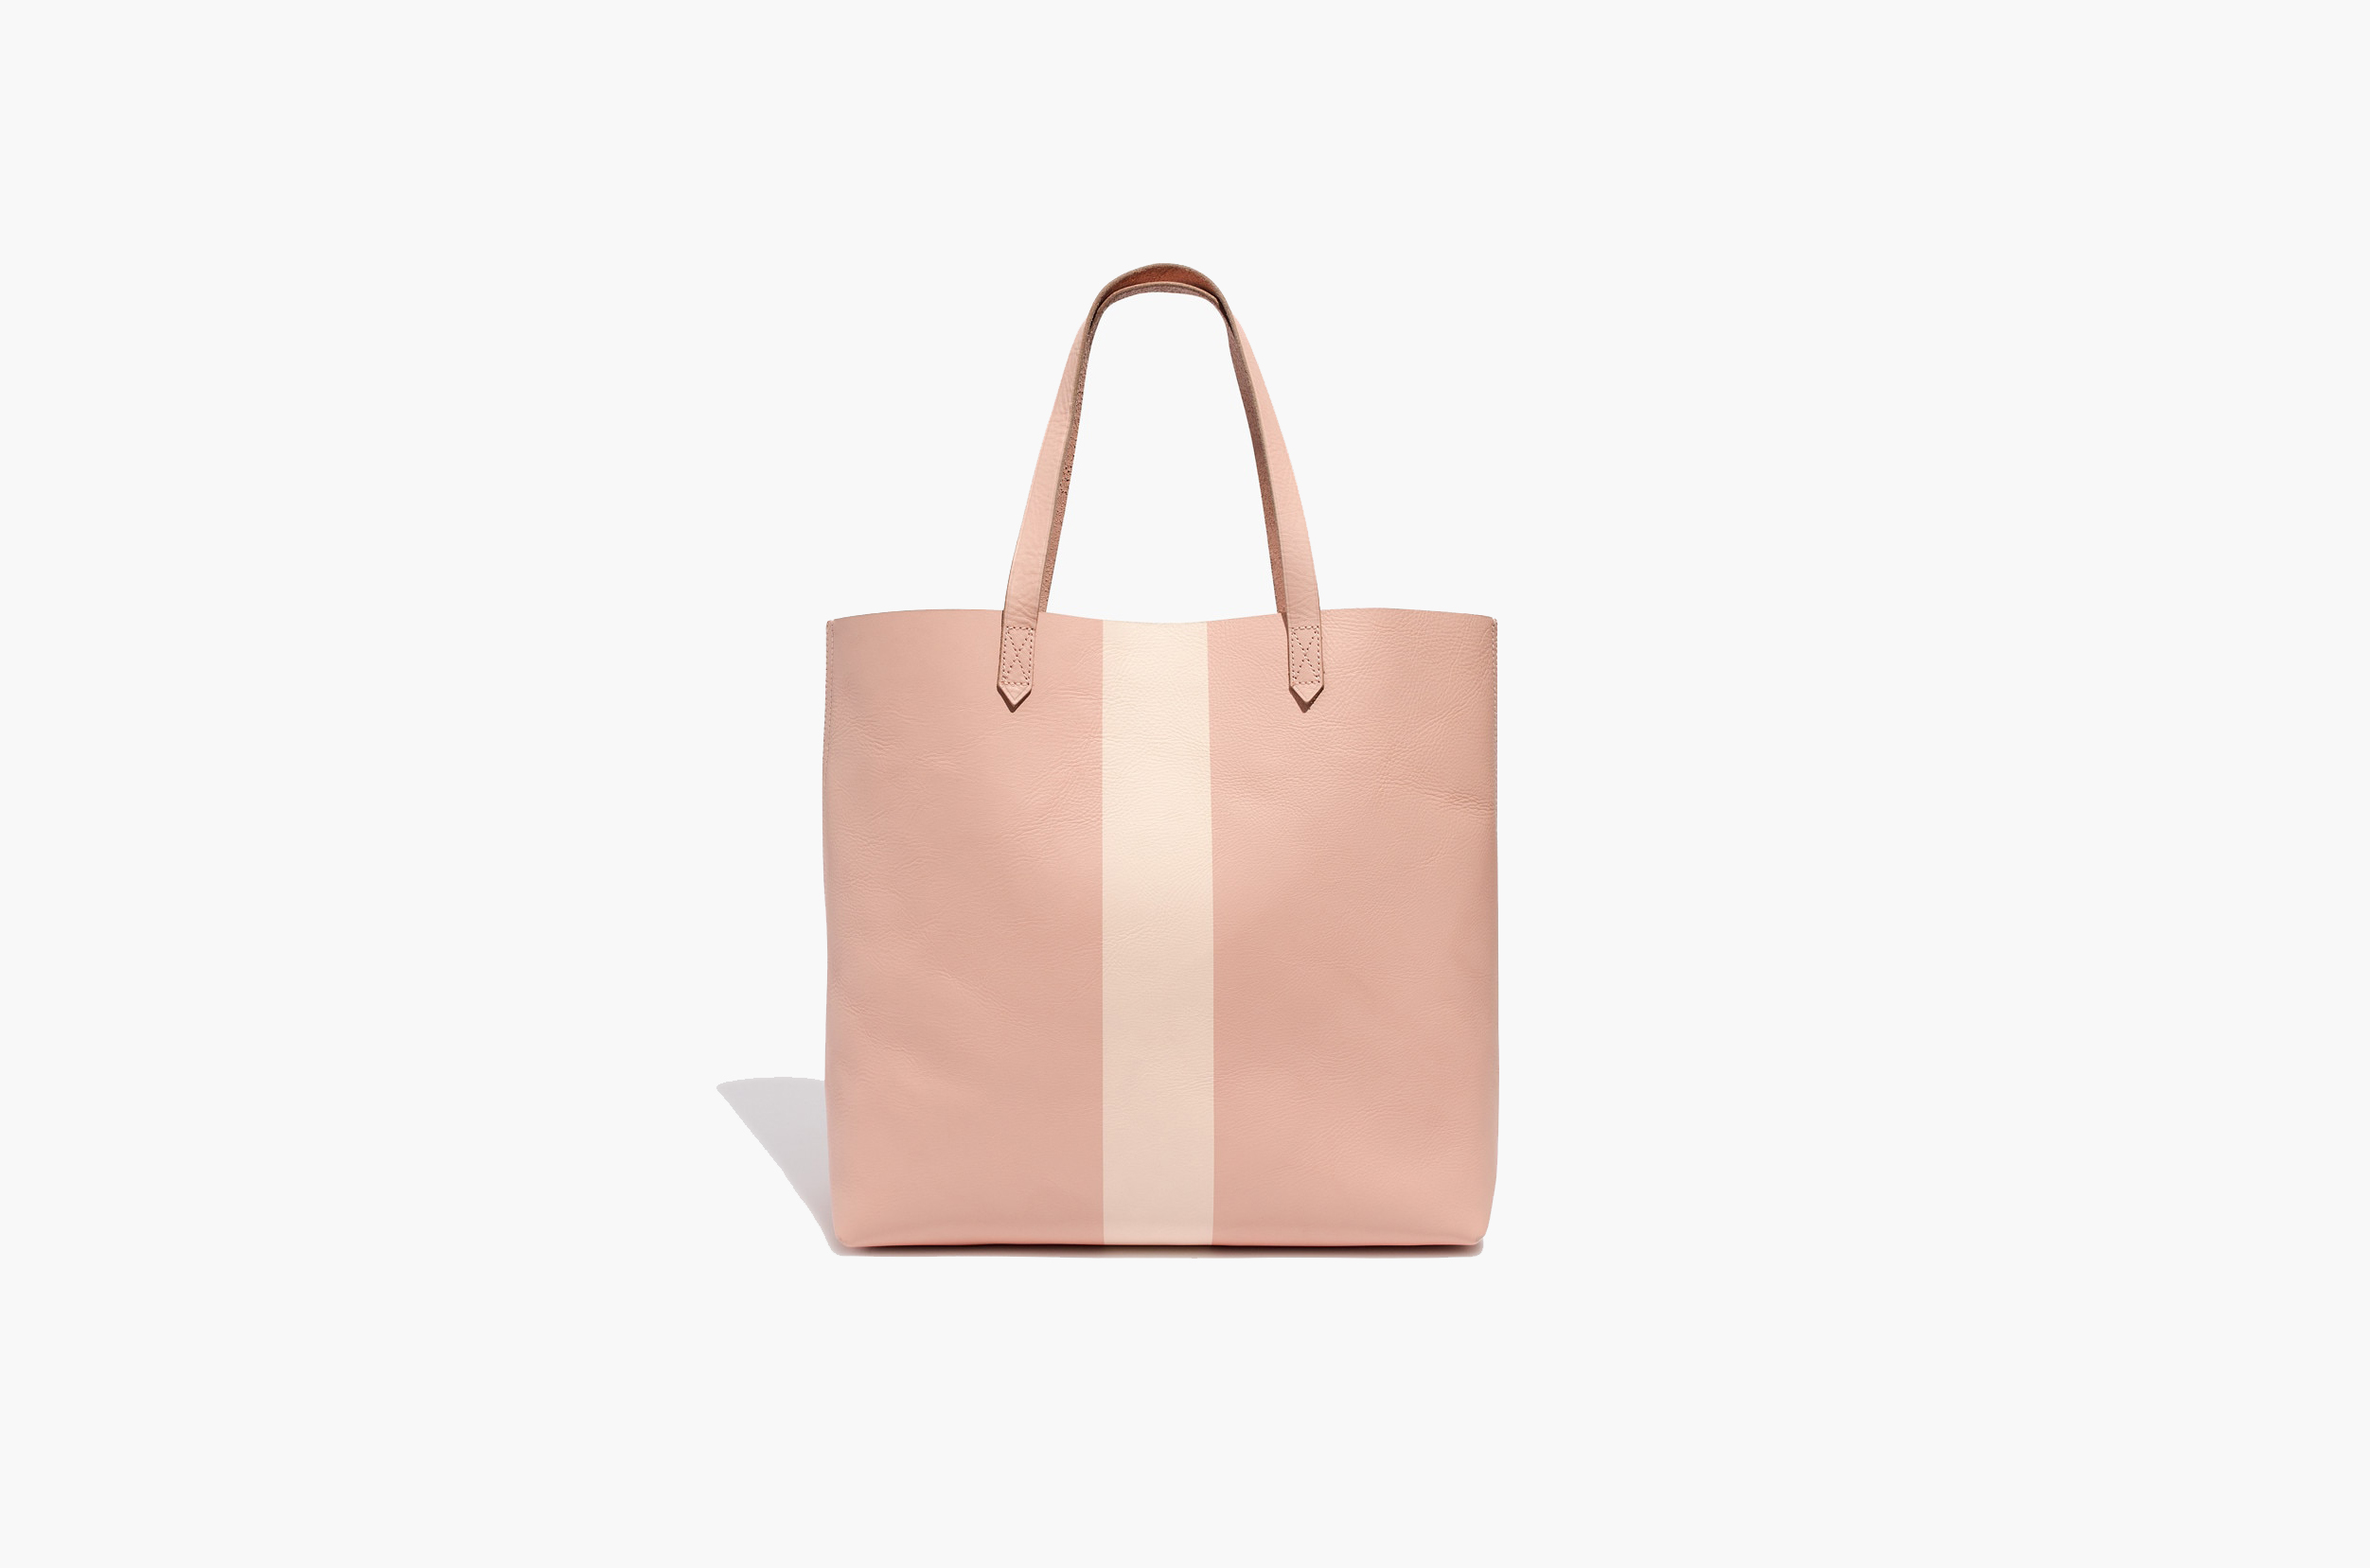 This Madewell Tote Is 50% Off, Insanely Chic and Super Functional